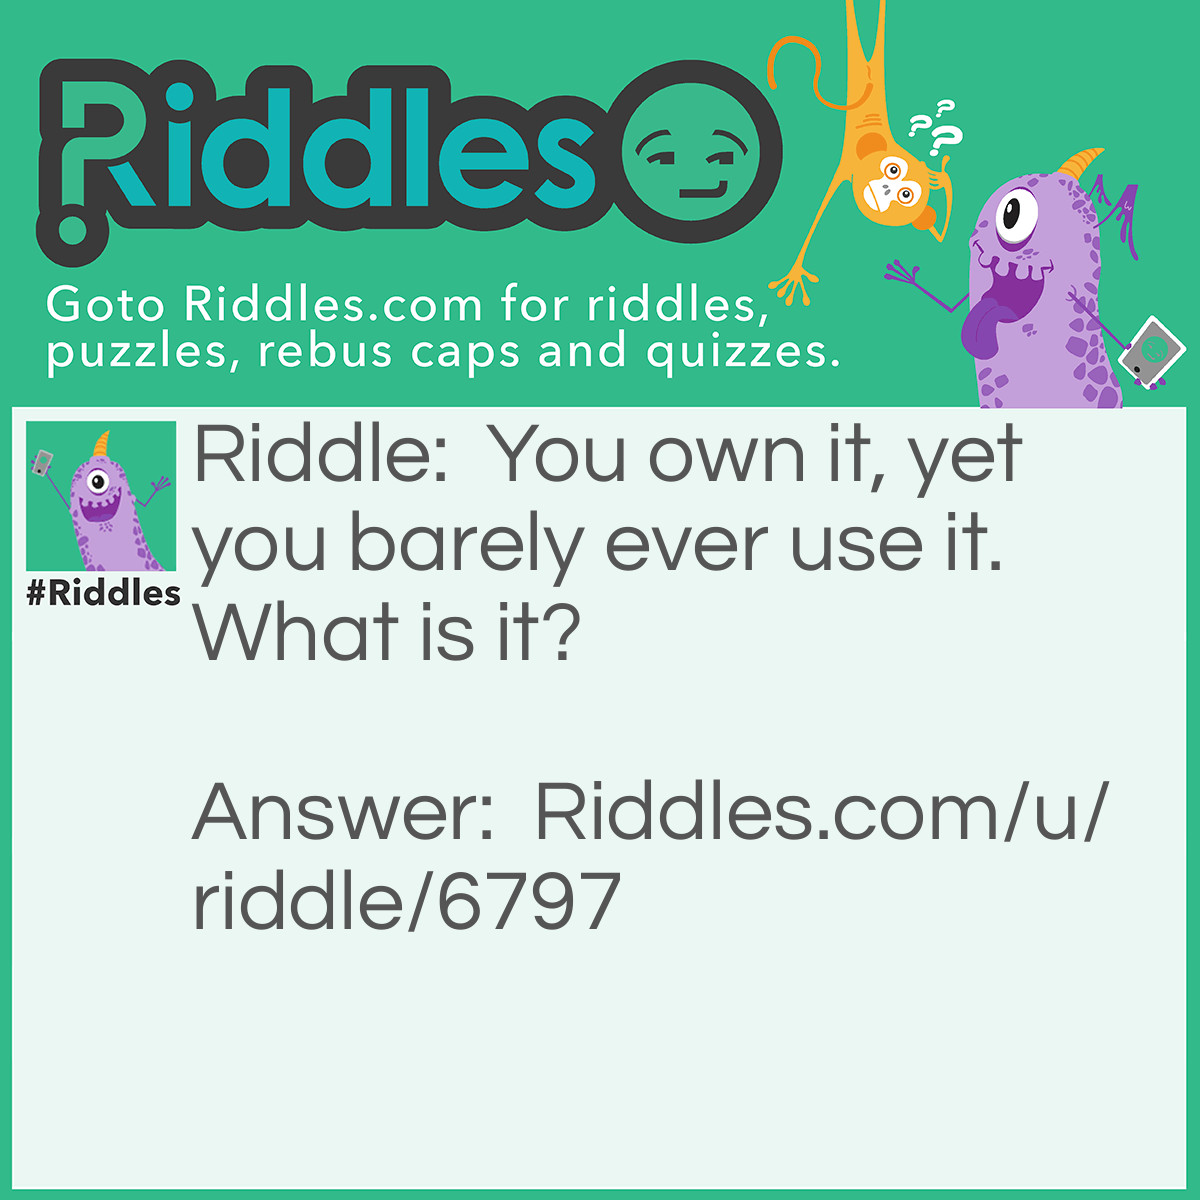 Riddle: You own it, yet you barely ever use it. What is it? Answer: Your Name.